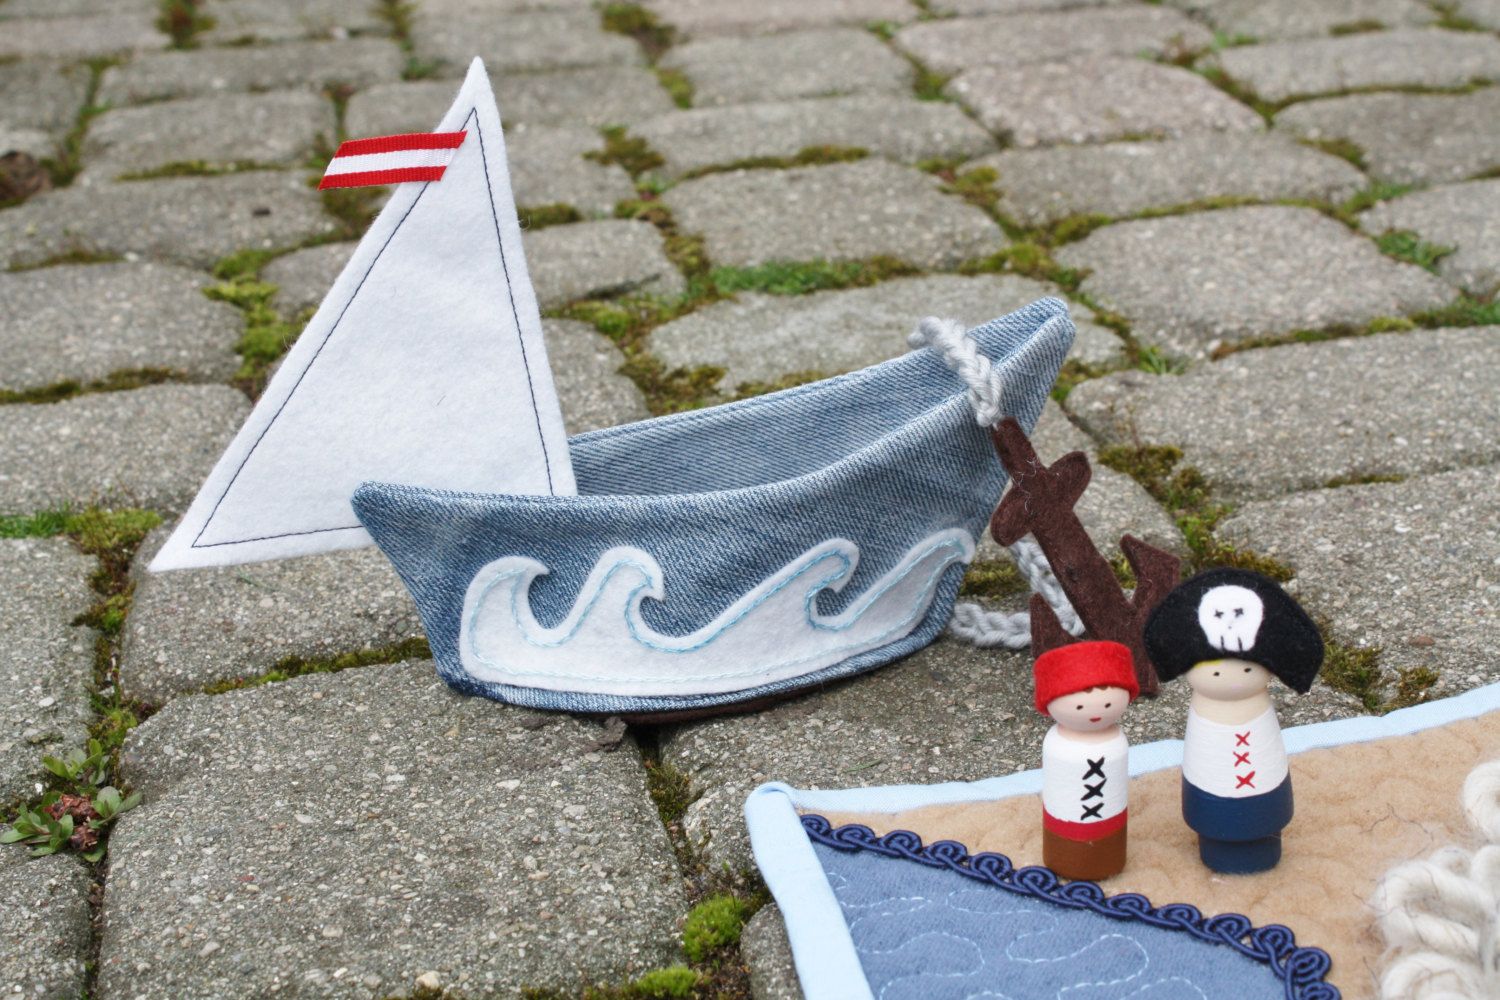 Pirate Play Mat from Songbird & Hollow at Etsy